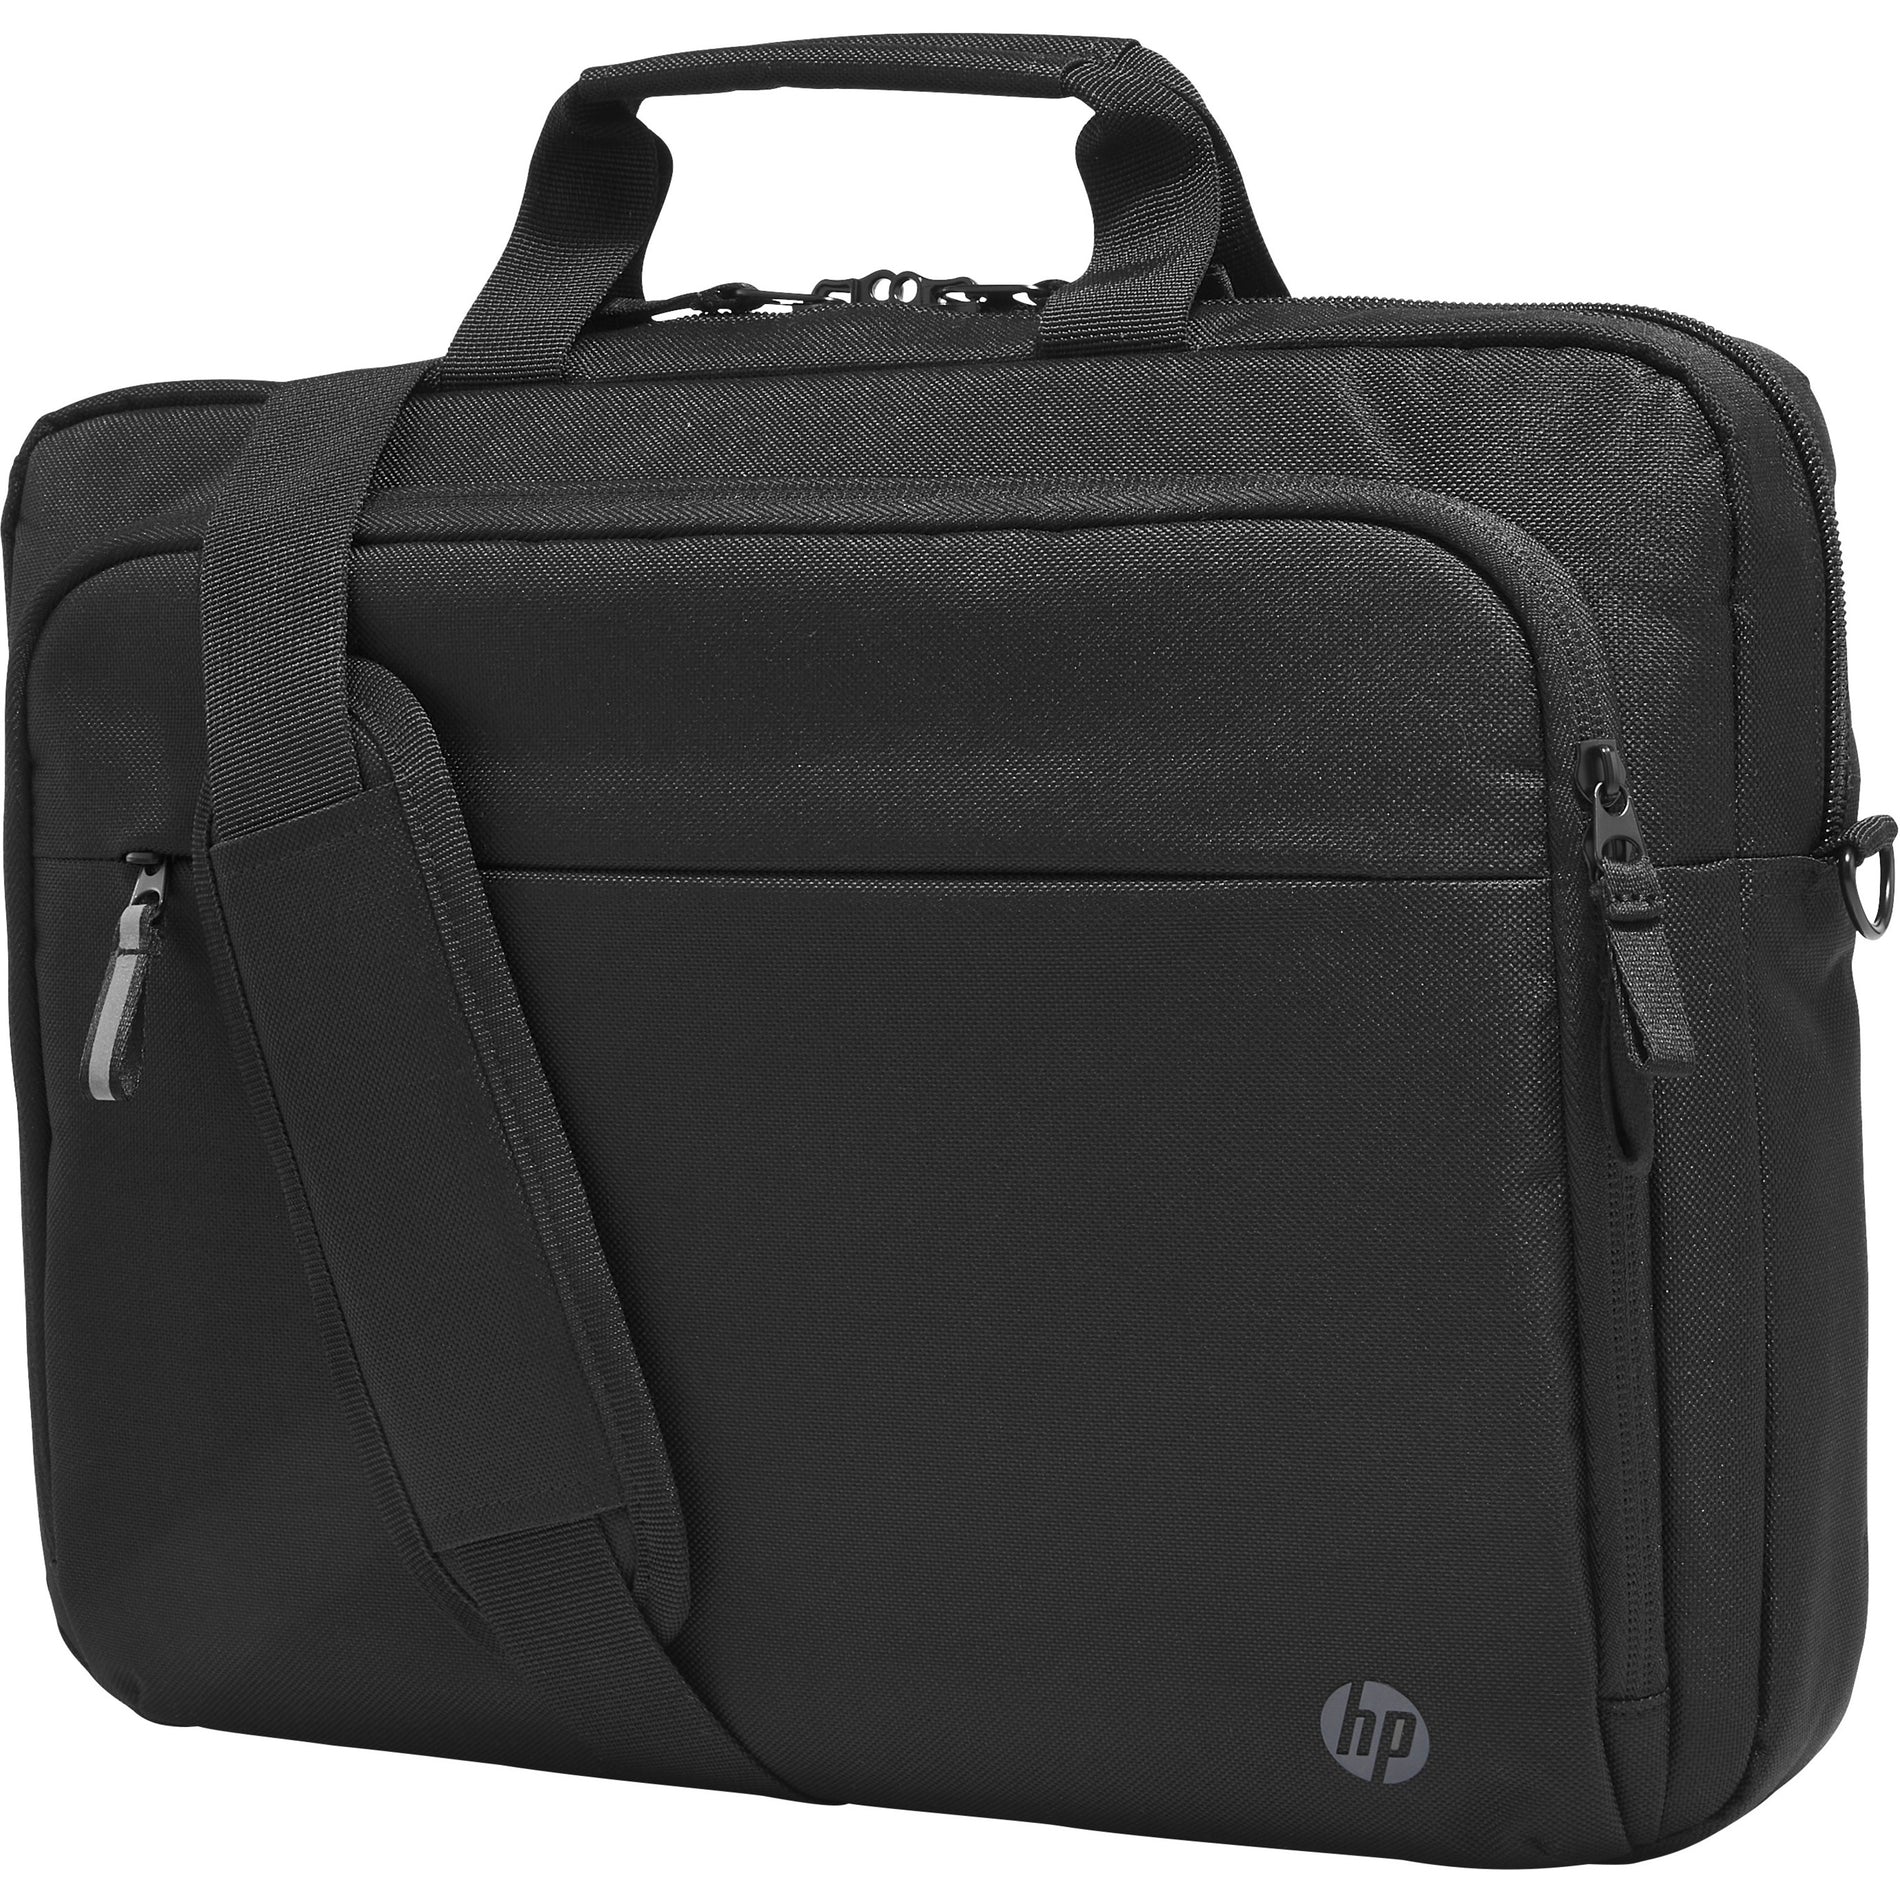 HP 500S7AA Professional 15.6-inch Laptop Bag, Messenger Style, Black, for Notebook, Smartphone, Accessories